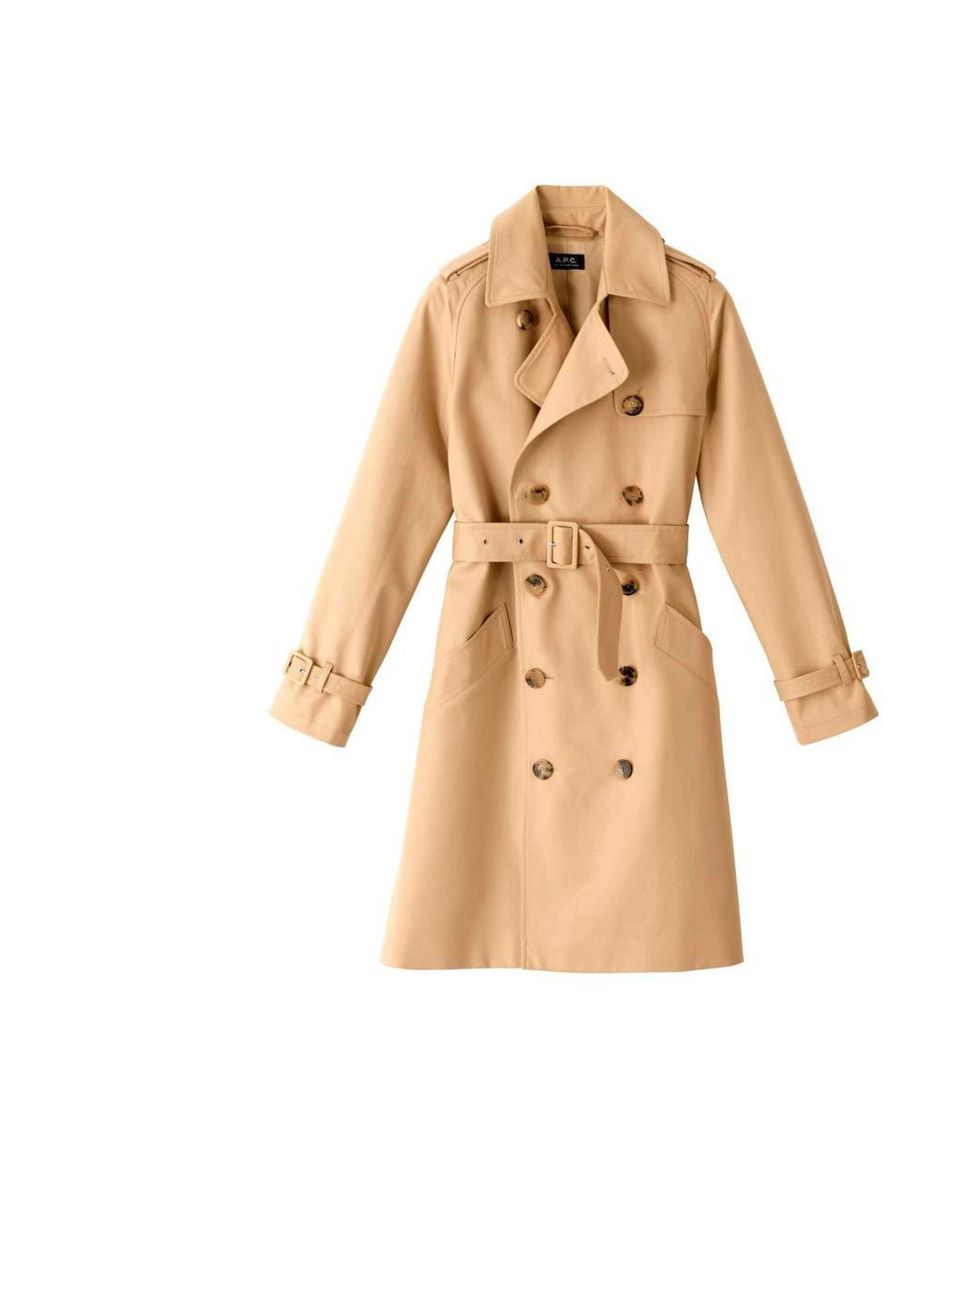 <p>The trench is a true modern day must-have, and this version is beautifully crafted and water-proof to get you through the seasons. £342, <a href="http://www.apc.fr/wwuk/women/coats/new-trench-coat_pFVDCFFCB.html">A.P.C</a></p>